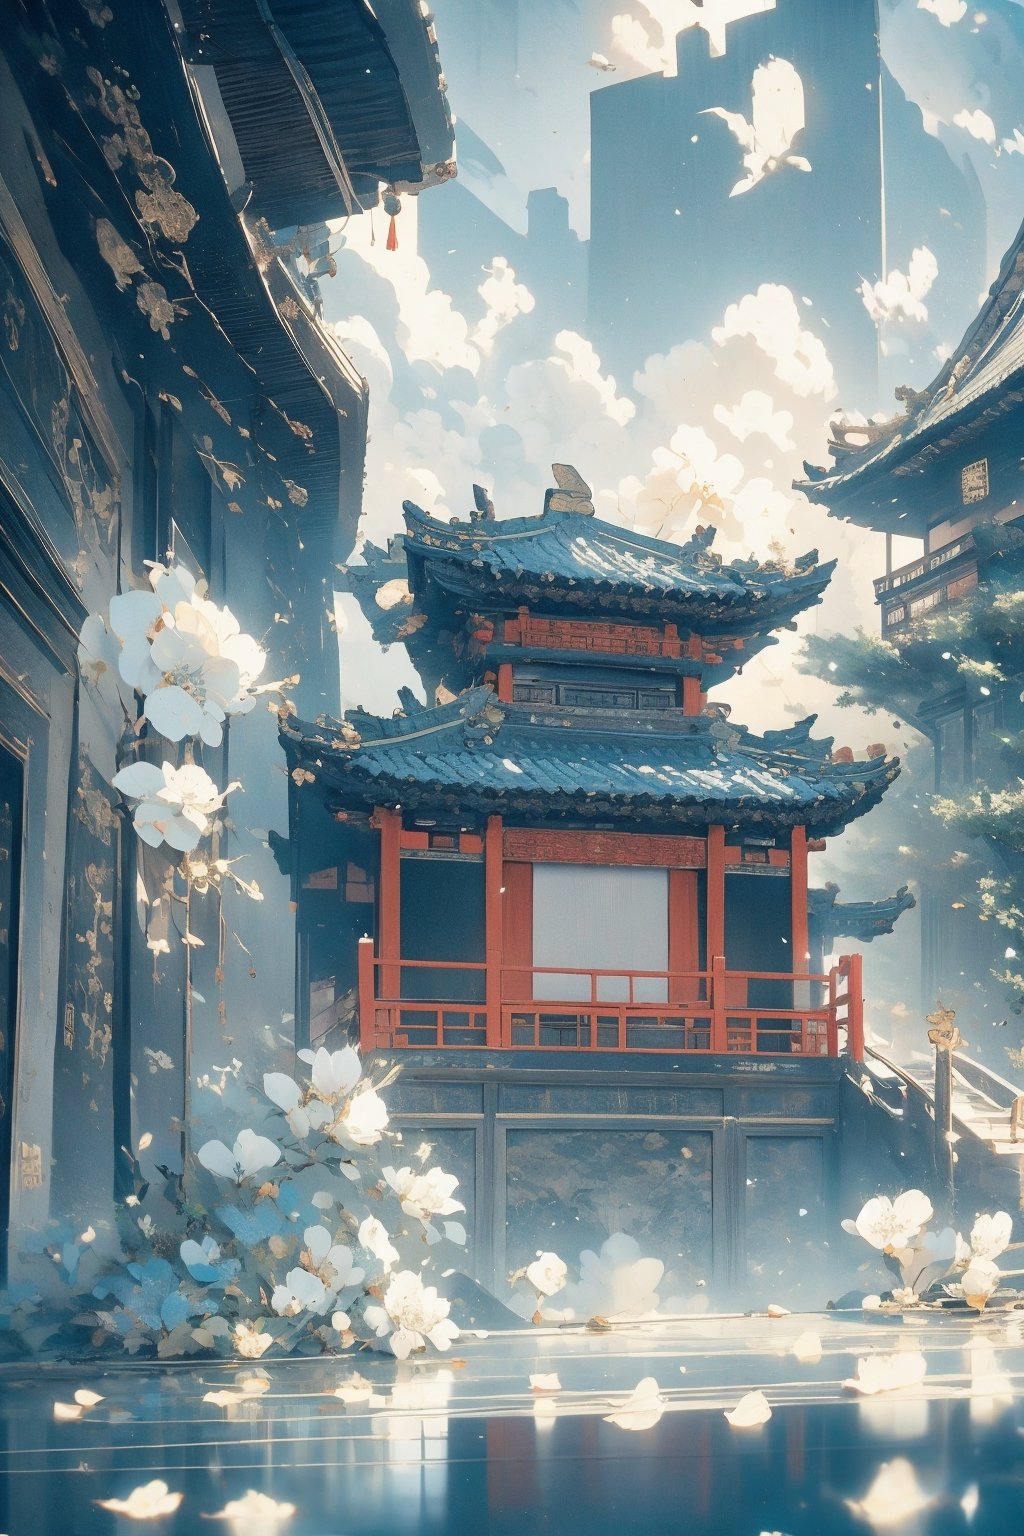 outdoors, sky, cloud, water, tree, no humans, building, scenery, reflection, lantern, stairs, architecture, east asian architecture,Chinese Architecture,blue moon, blue lotus pond,Surreal composition,White flowers and falling petals,Looking down slightly